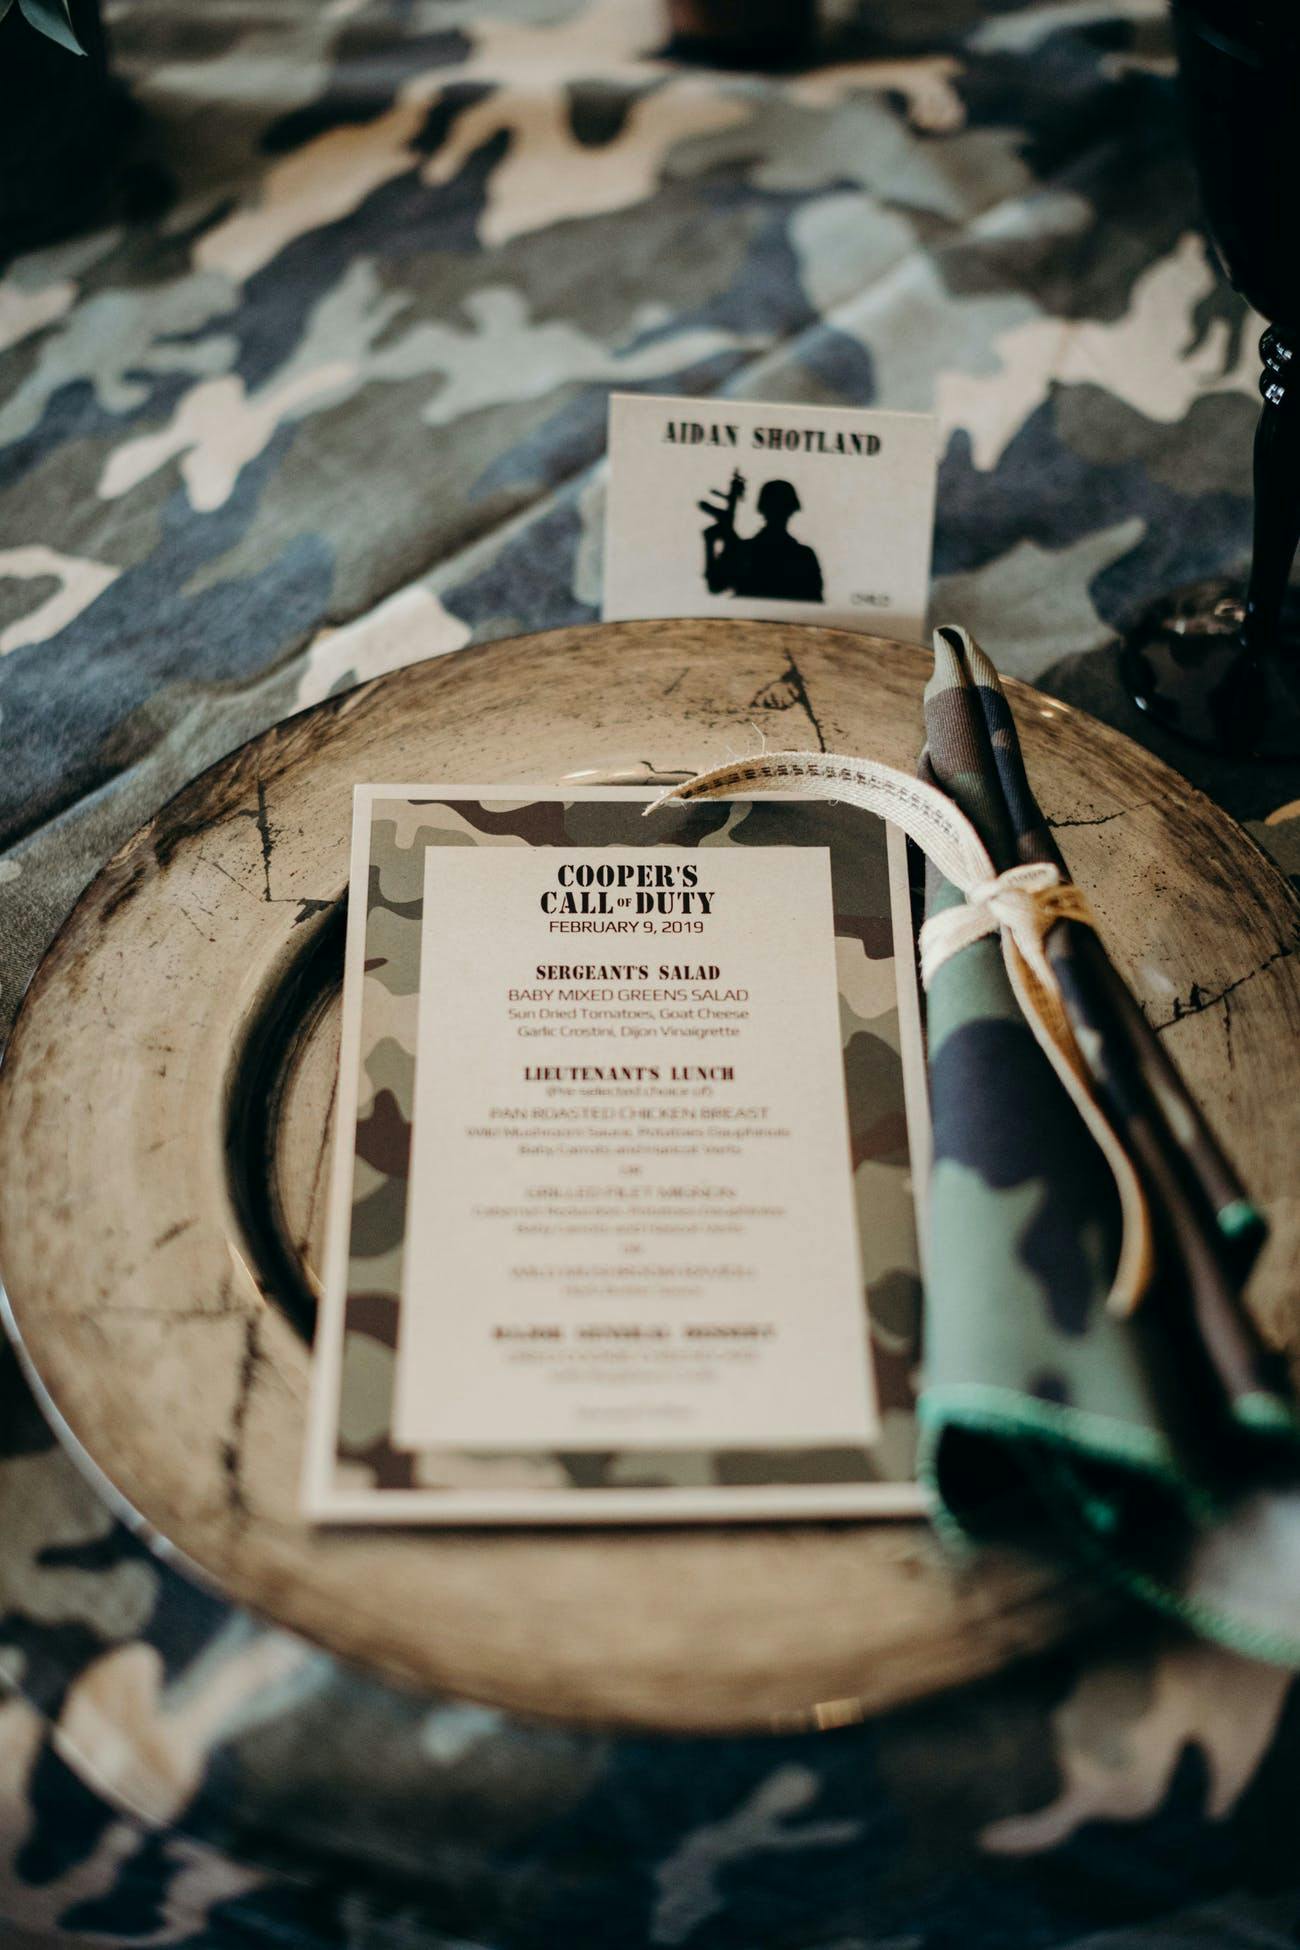 Call of duty table setting theme birthday party | PartySlate